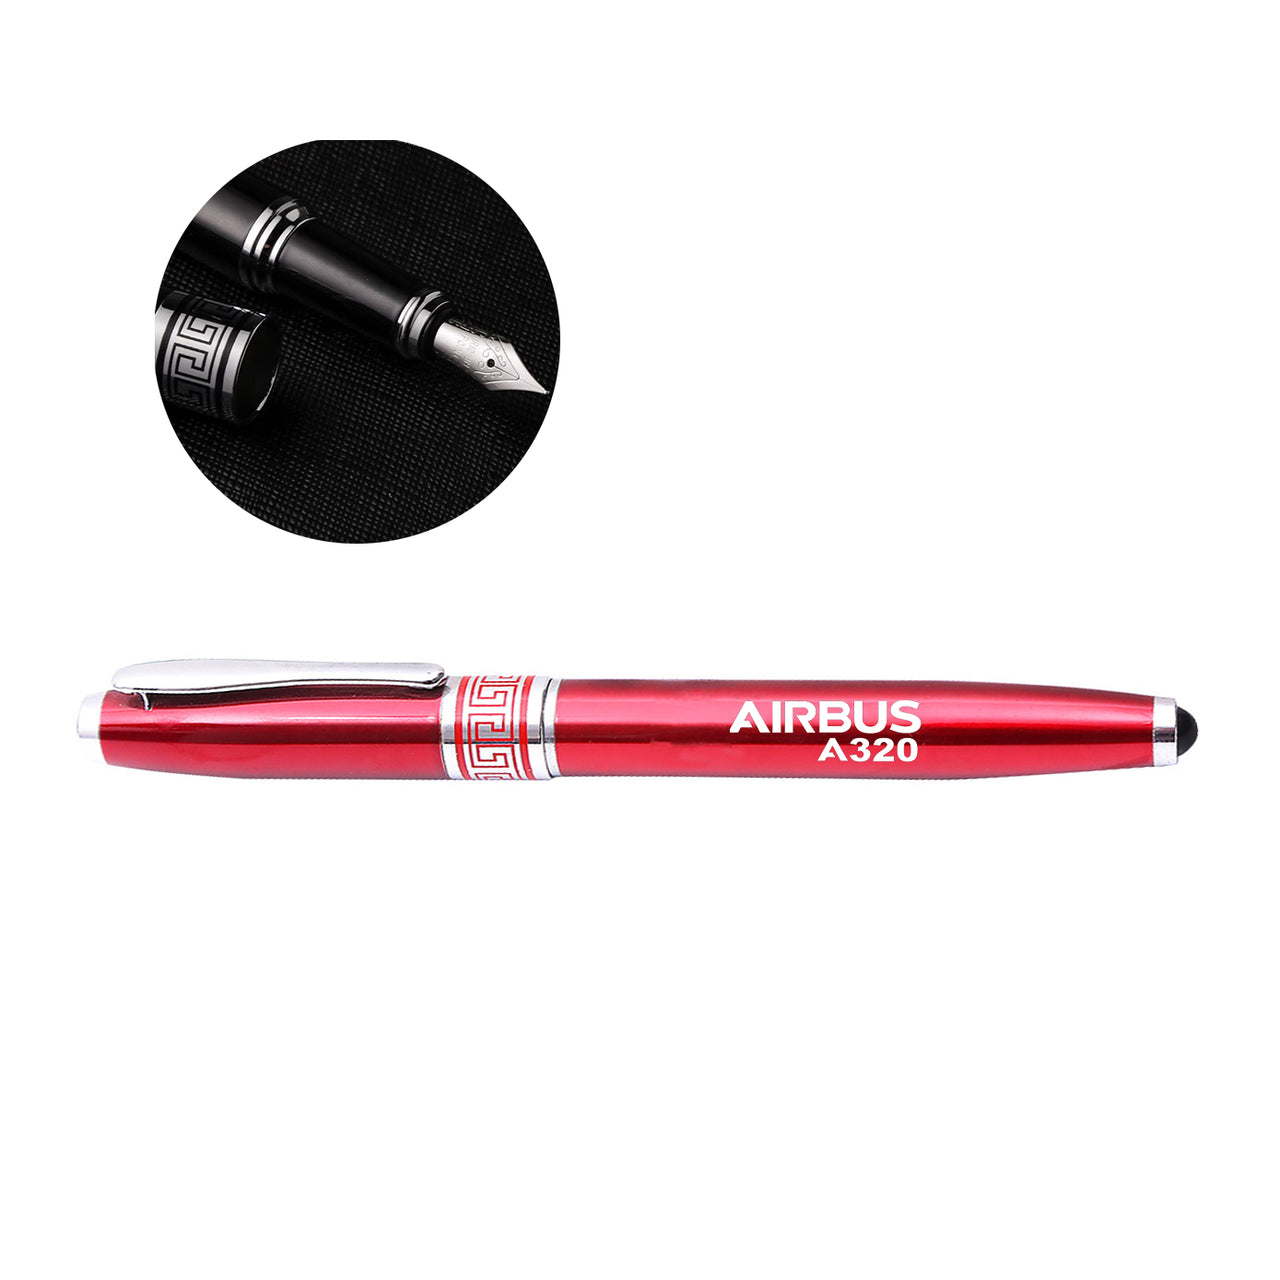 Airbus A320 & Text Designed Pens